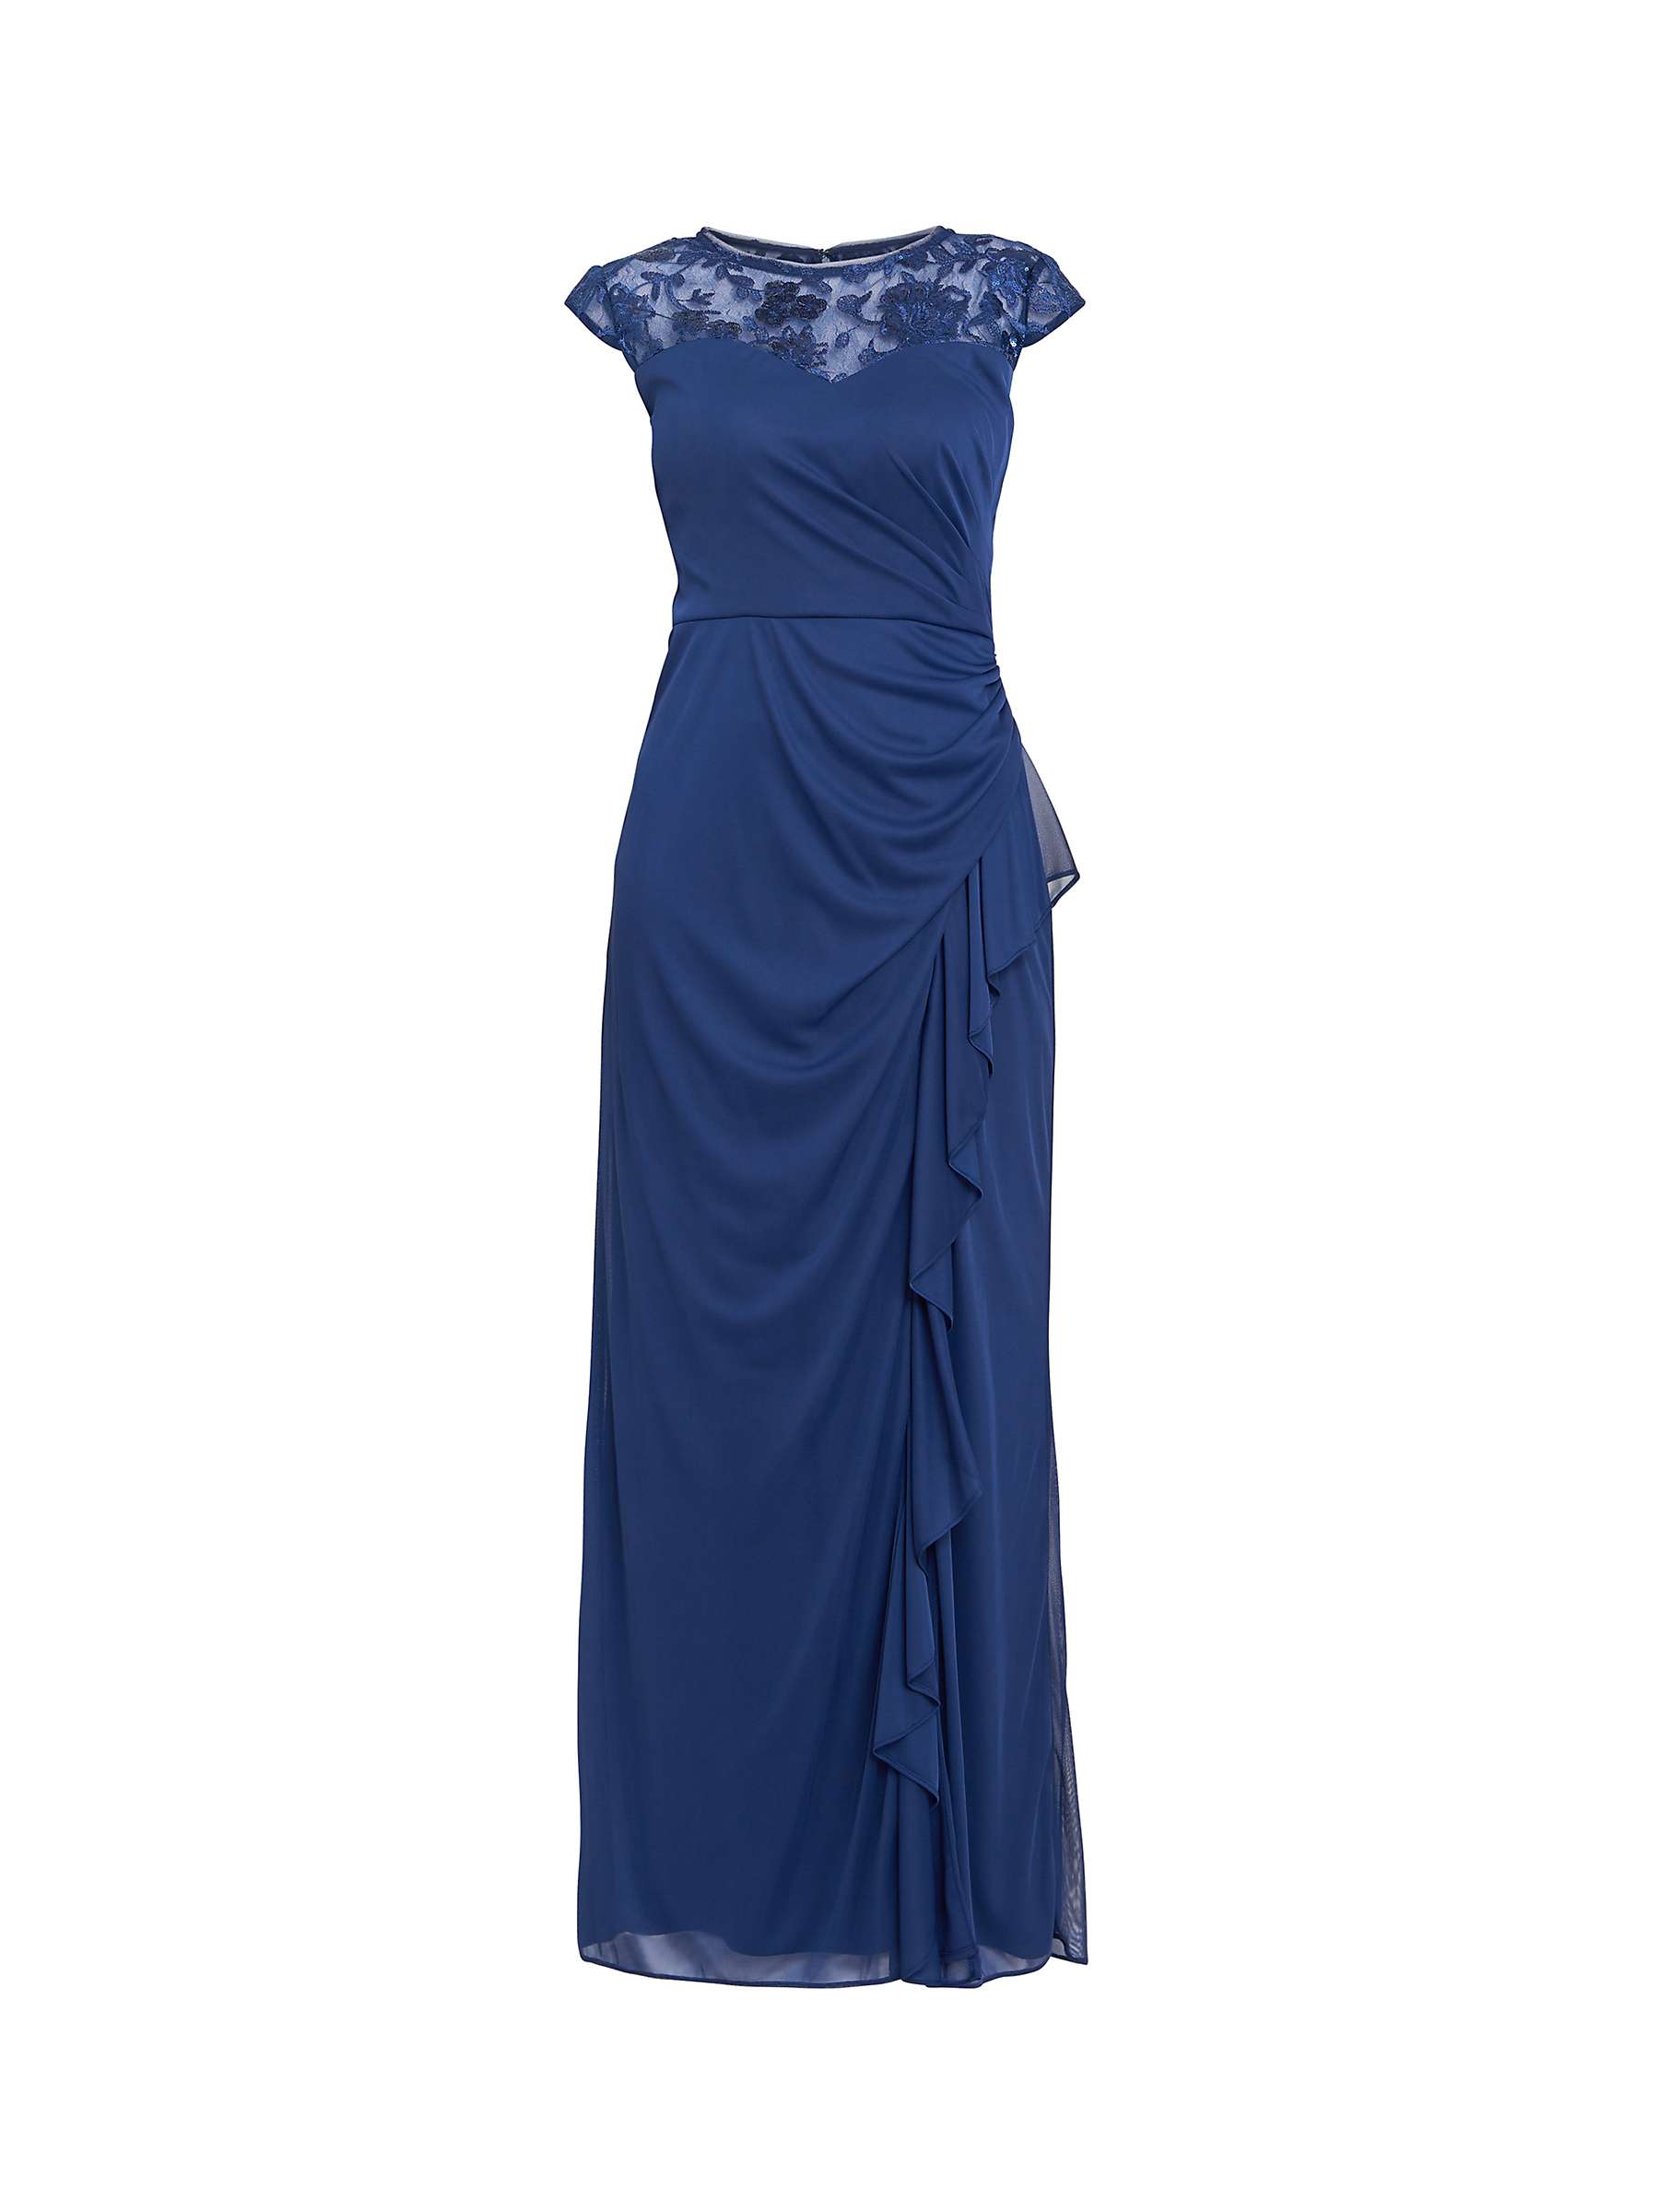 Buy Gina Bacconi Cecilia Maxi Dress Embroidered Illusion Neckline, Navy Online at johnlewis.com